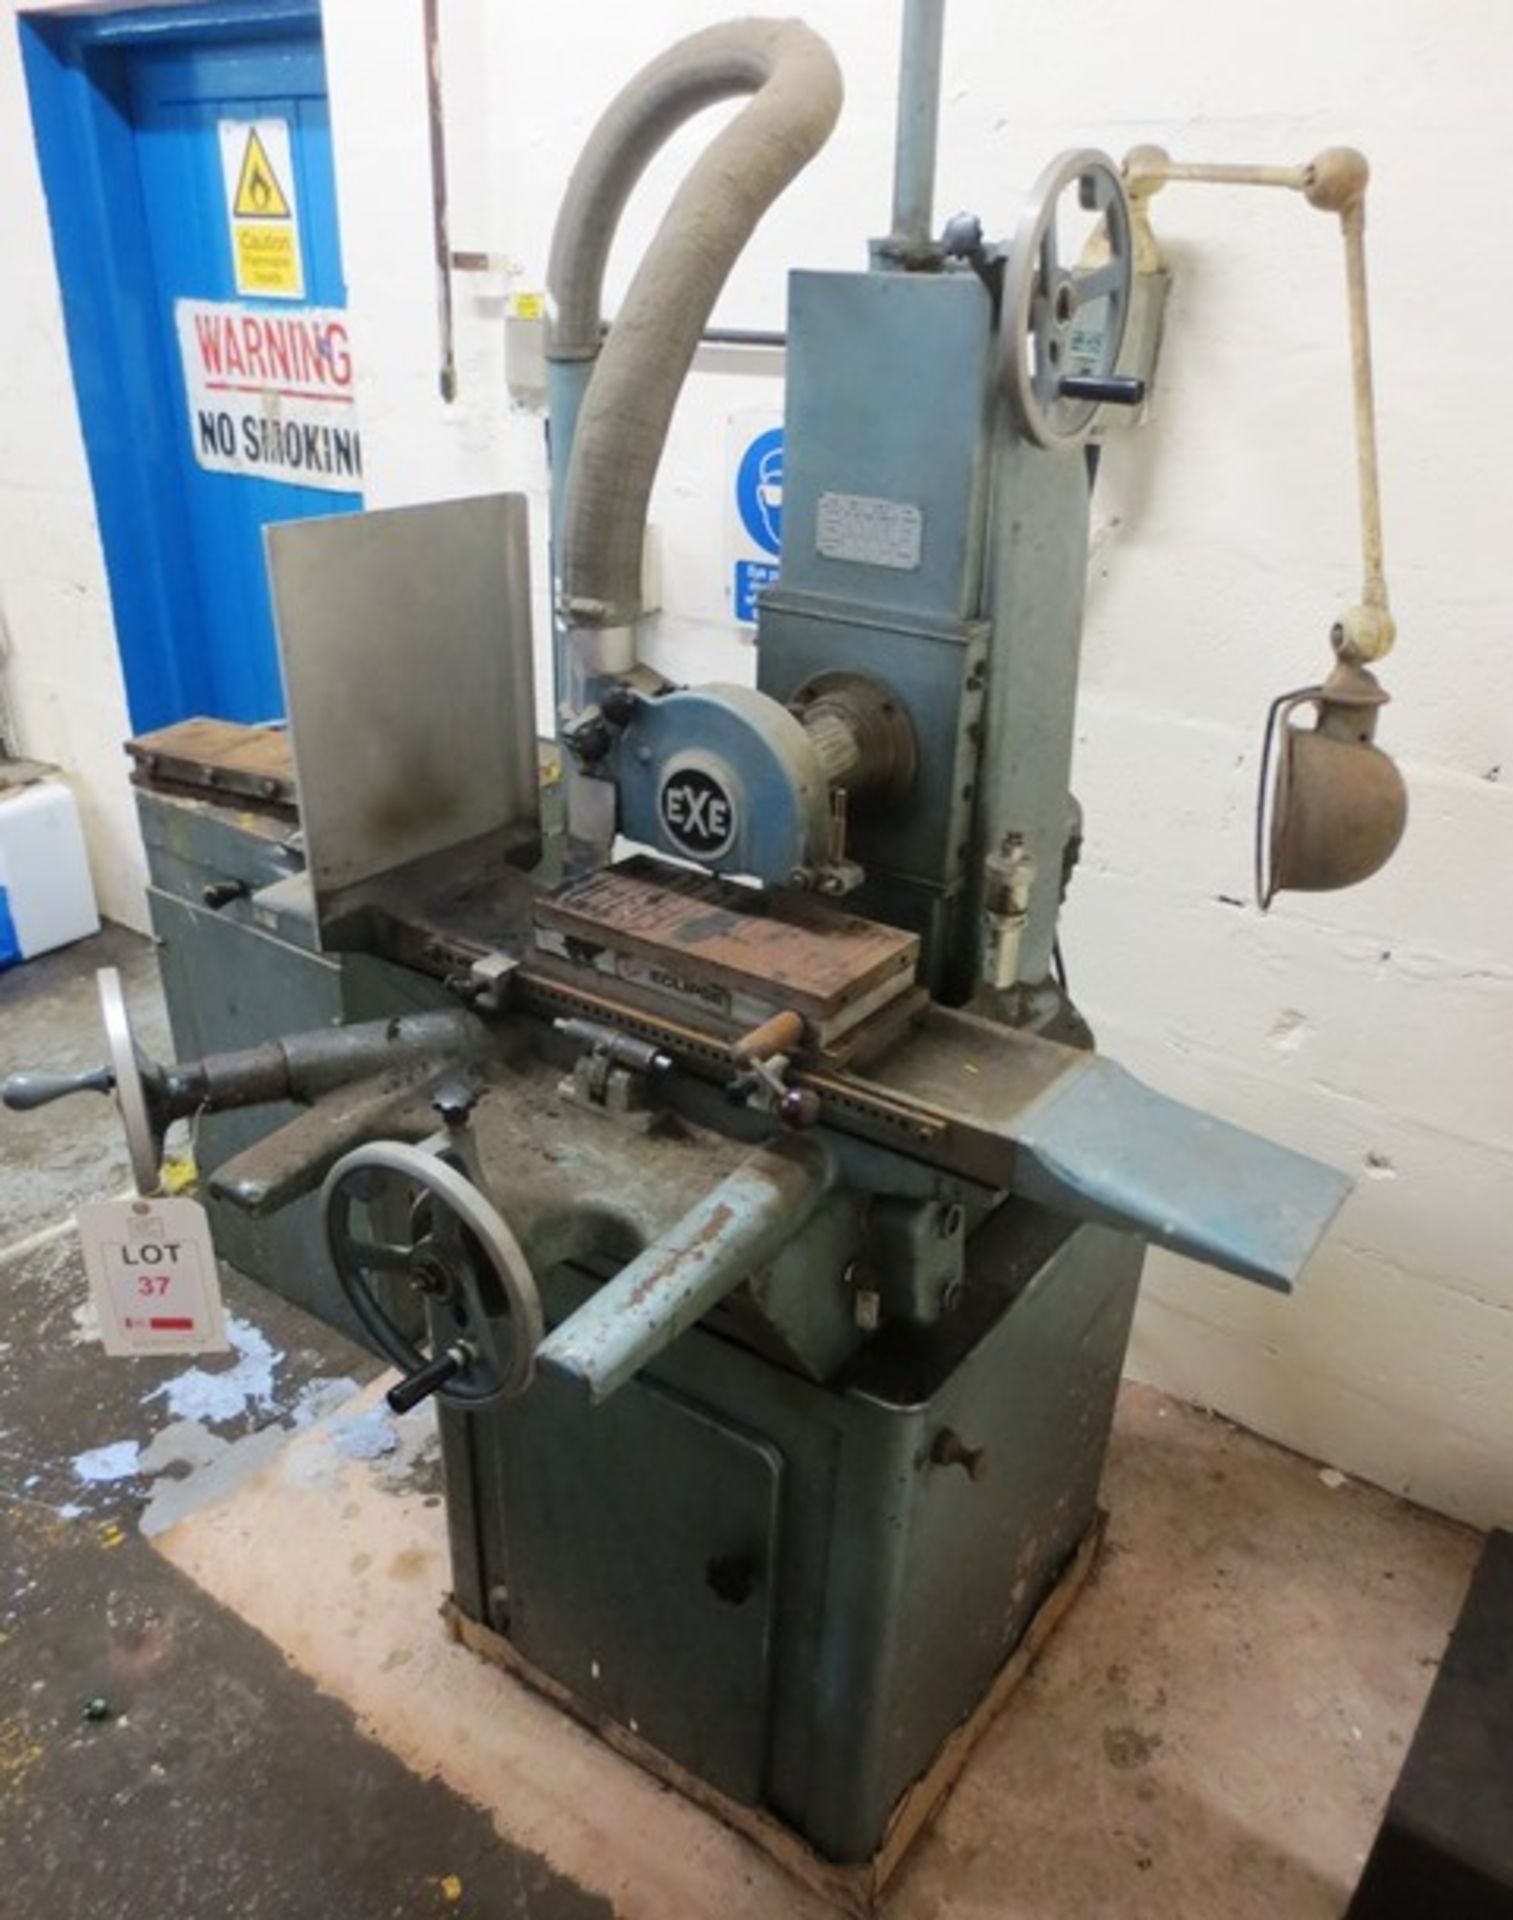 EXE horizontal surface grinder, Manual operating sliding tables and rise and fall spindle head, - Image 2 of 3